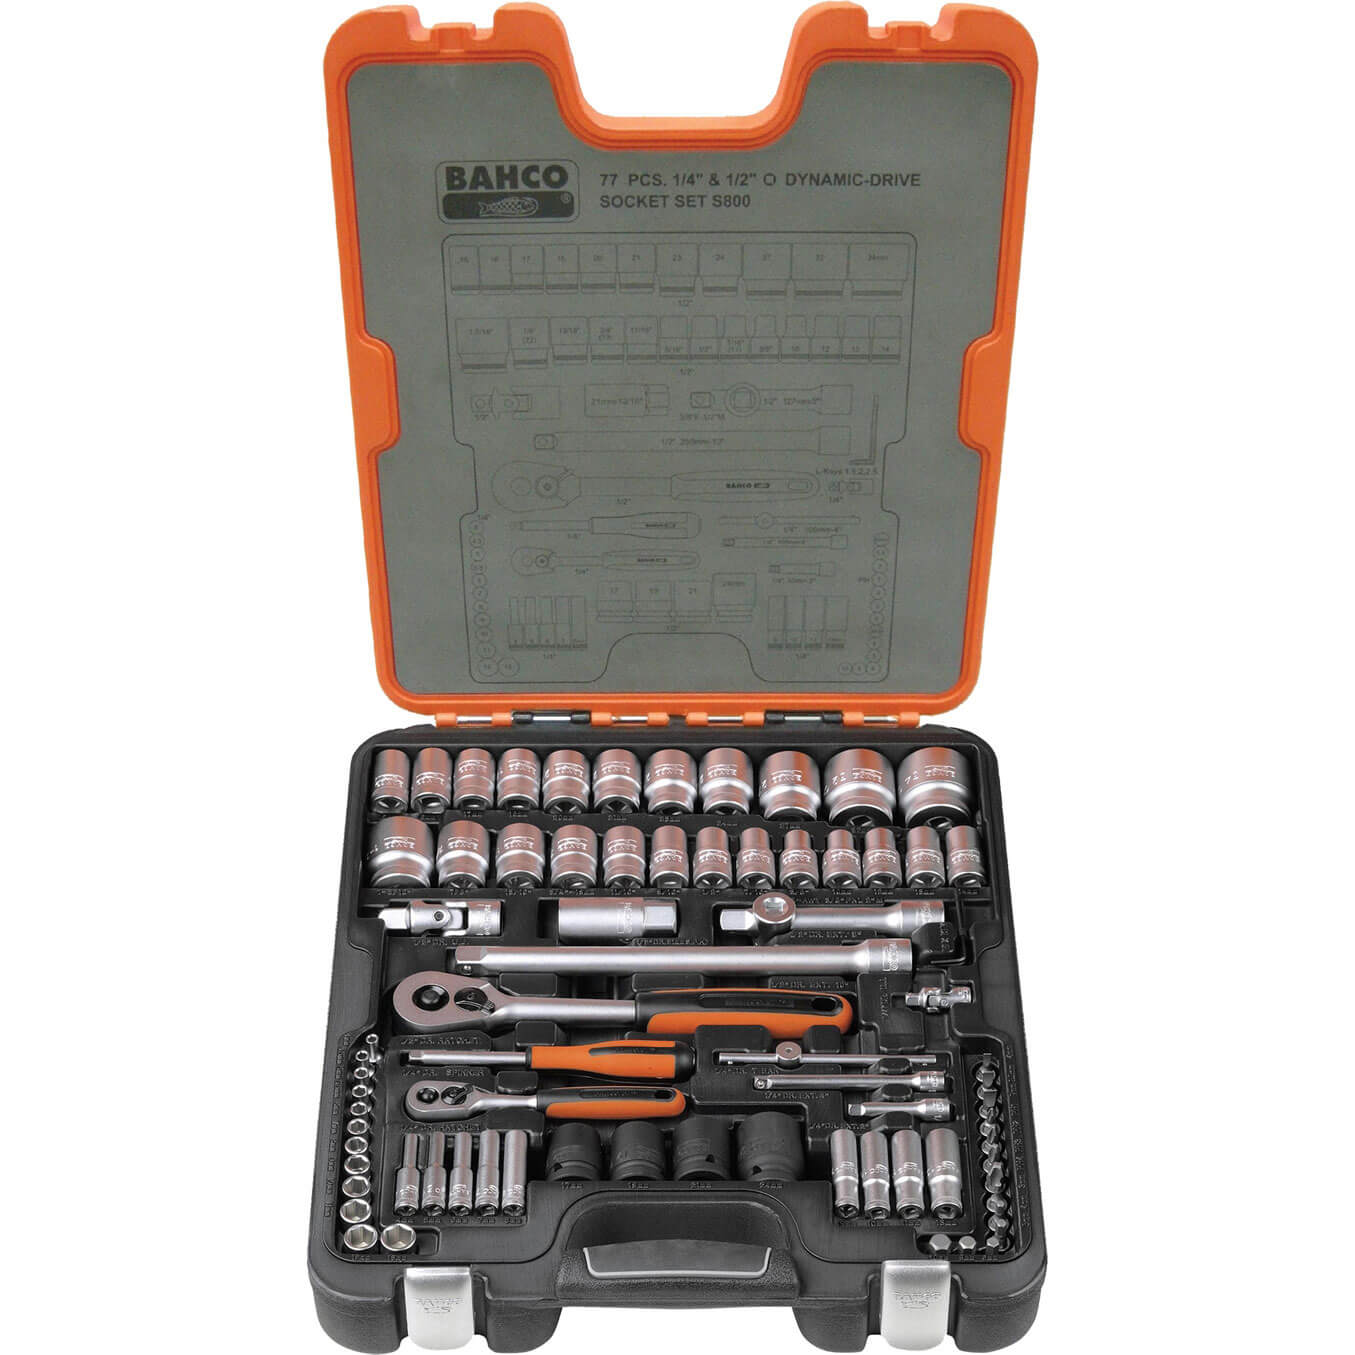 Image of Bahco 77 Piece Combination Drive Hex Socket and Screwdriver Bit Set Metric and Imperial Combination